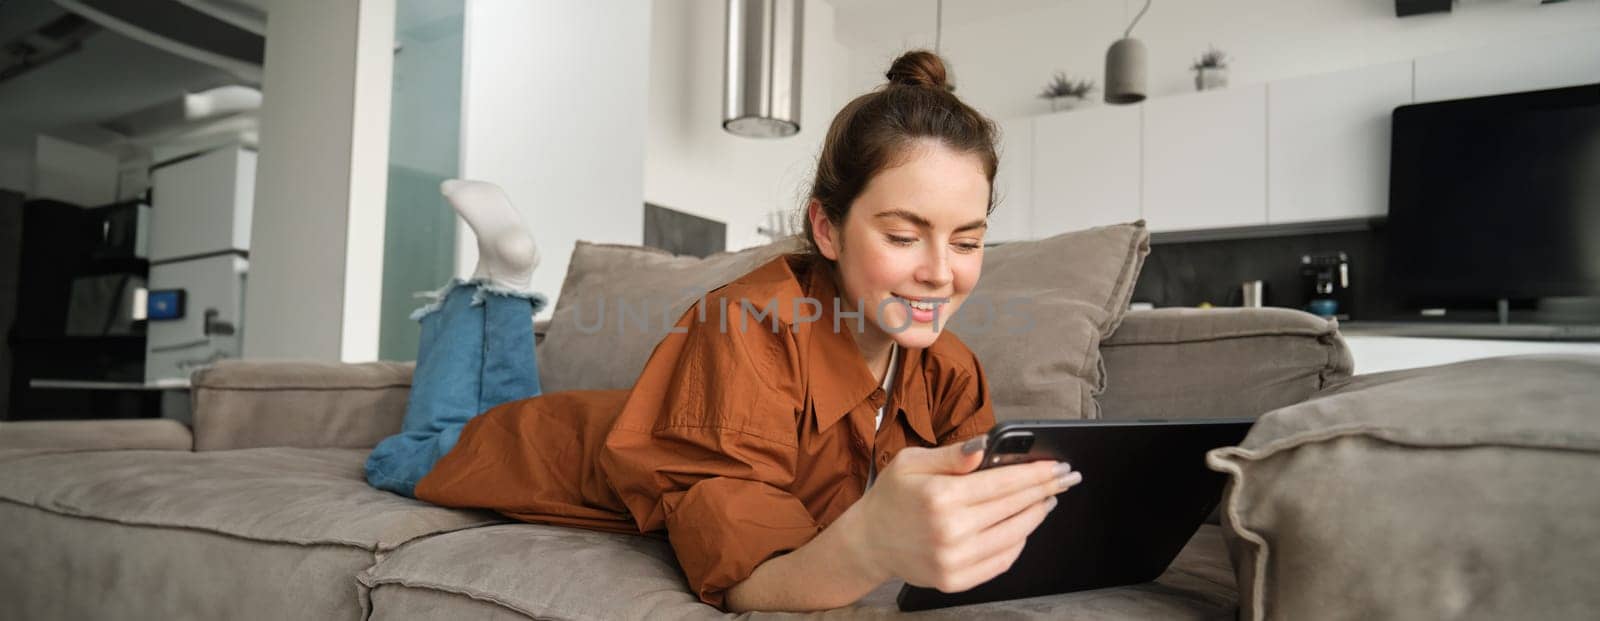 Weekend and lifestyle concept. Young woman lying on couch with digital tablet, scrolling social media, reading e-book or watching tv series on app.